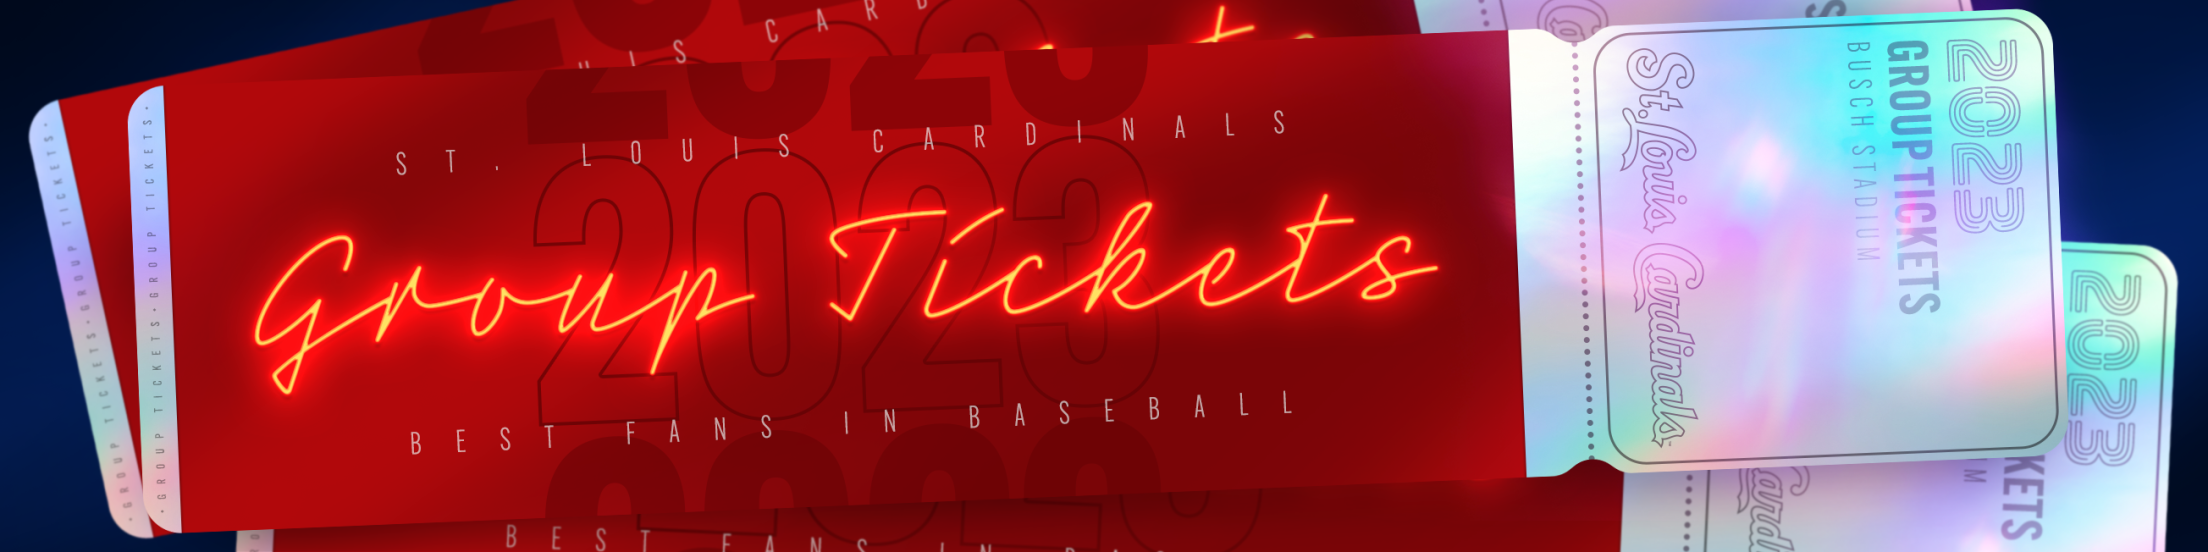 St. Louis Cardinals Tickets - Official Ticket Marketplace